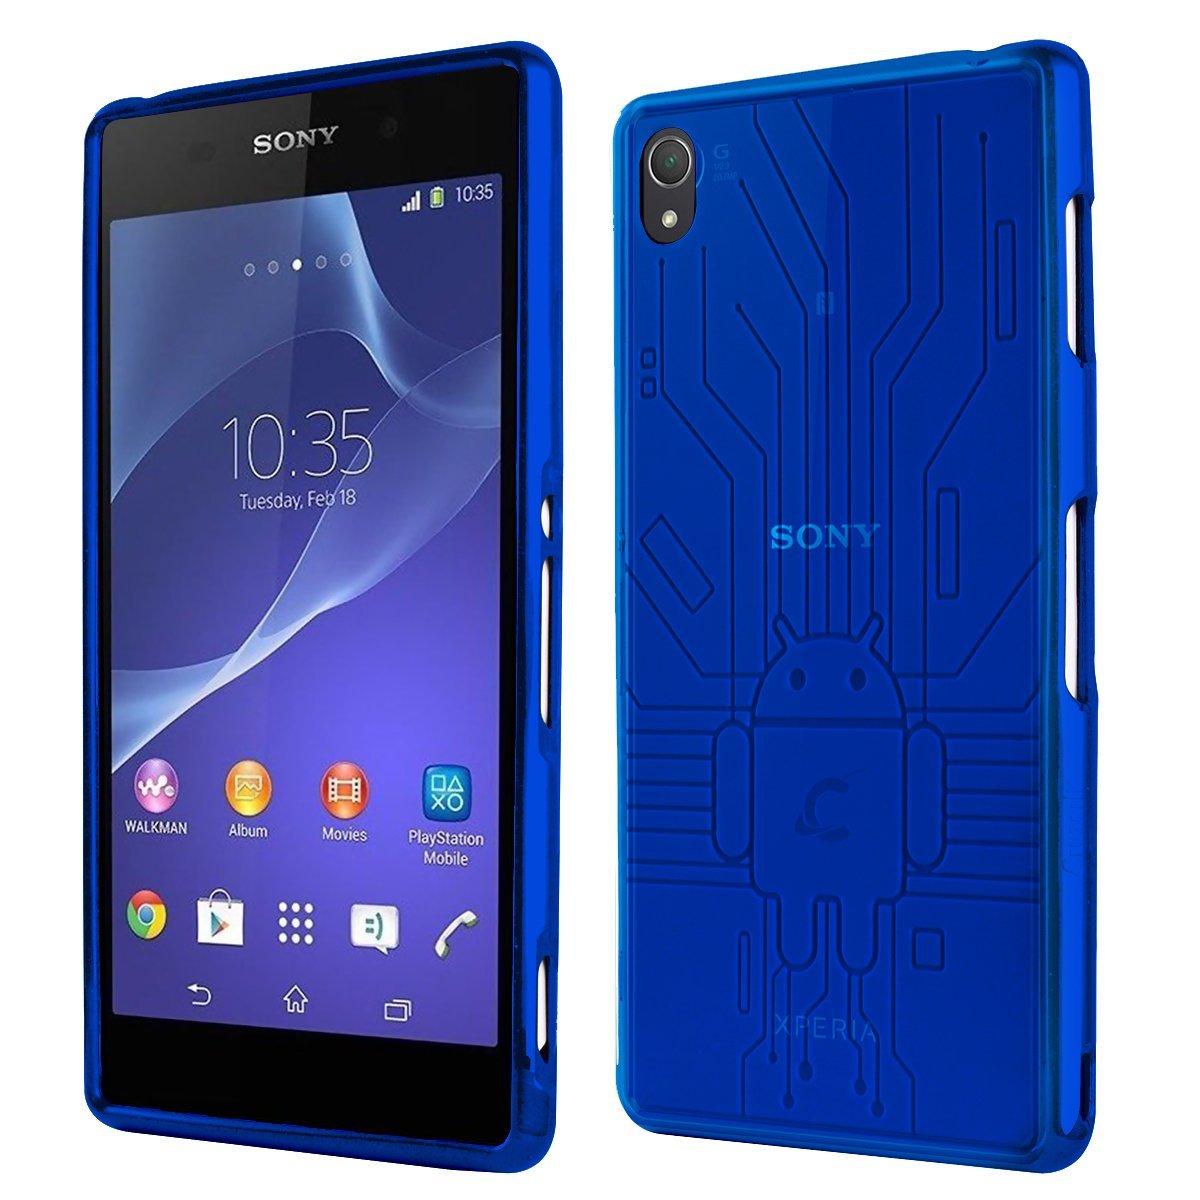 Uitgraving Bad Kalmte Top 5 cases for the Sony Xperia Z3